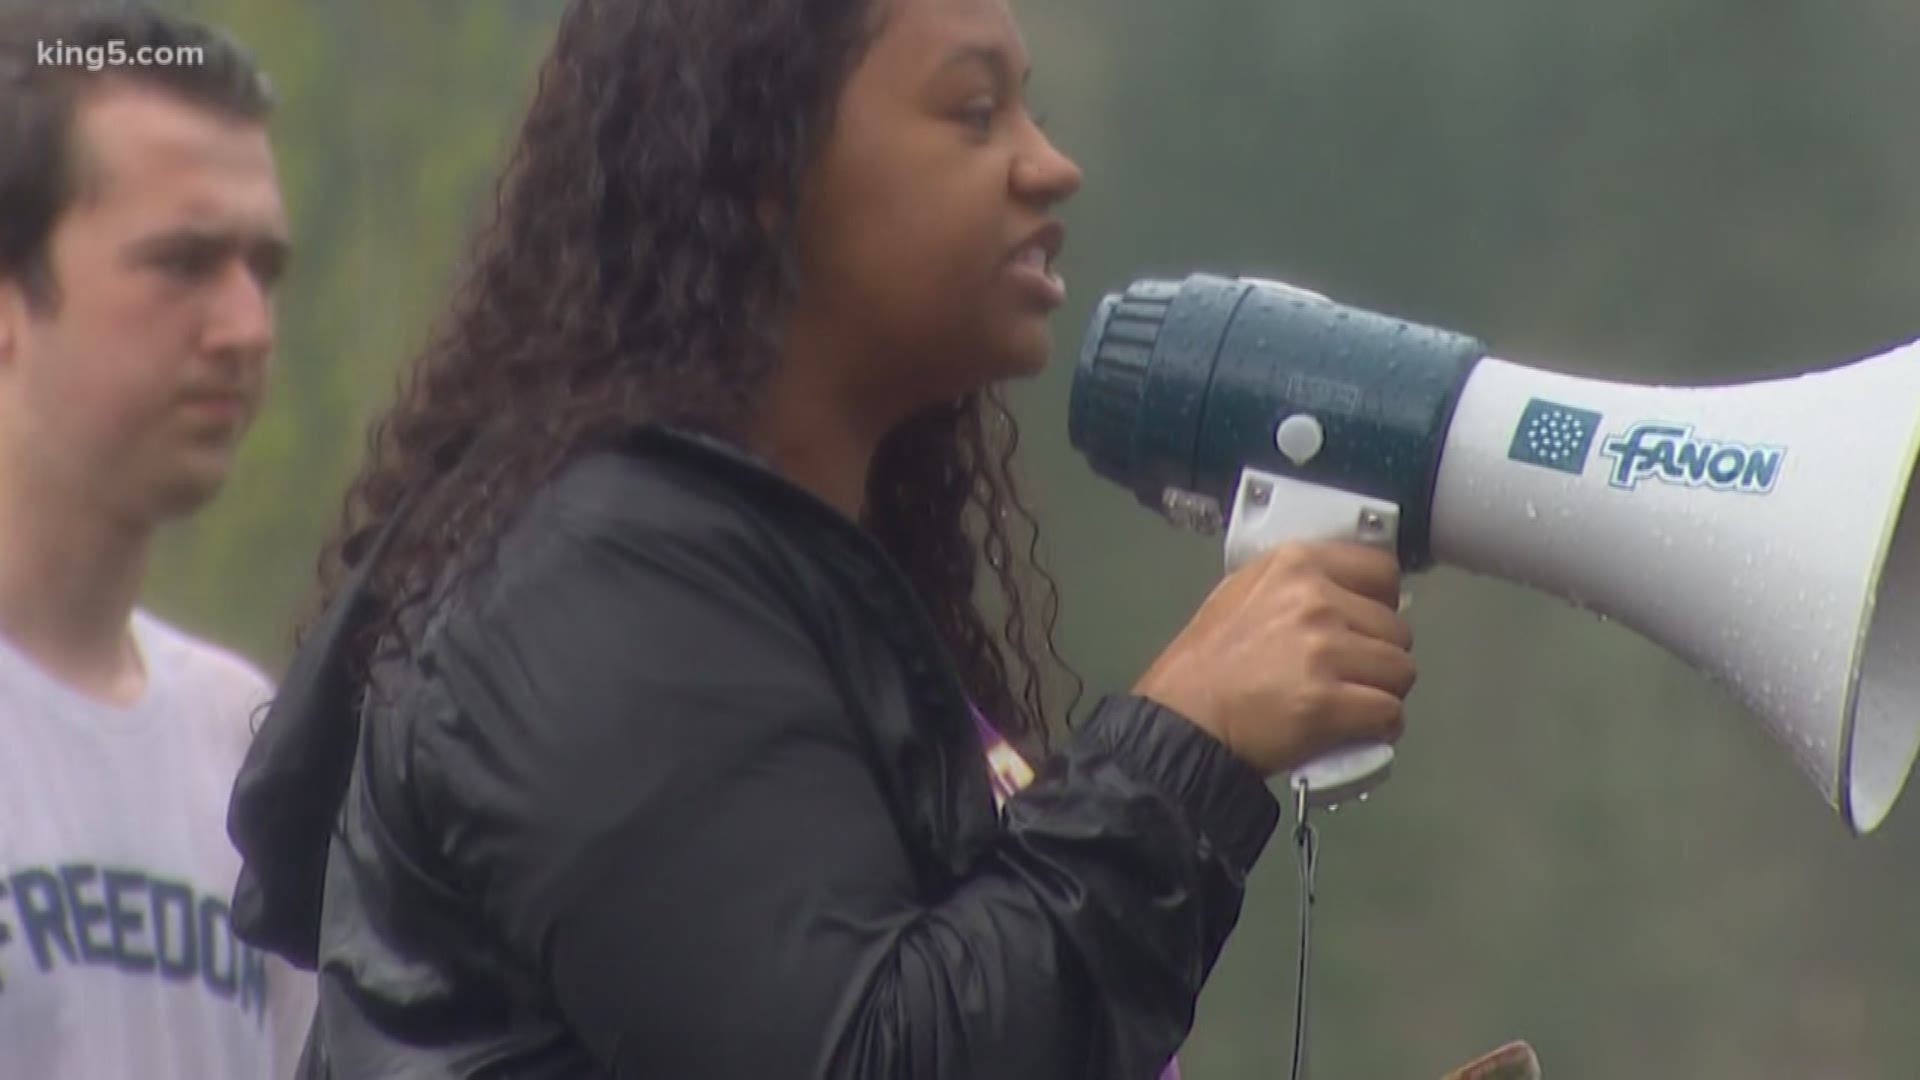 Students at Issaquah High School walked out of class Wednesday to protest a racist sign involving two of their classmates. KING 5's Michael Crowe reports.